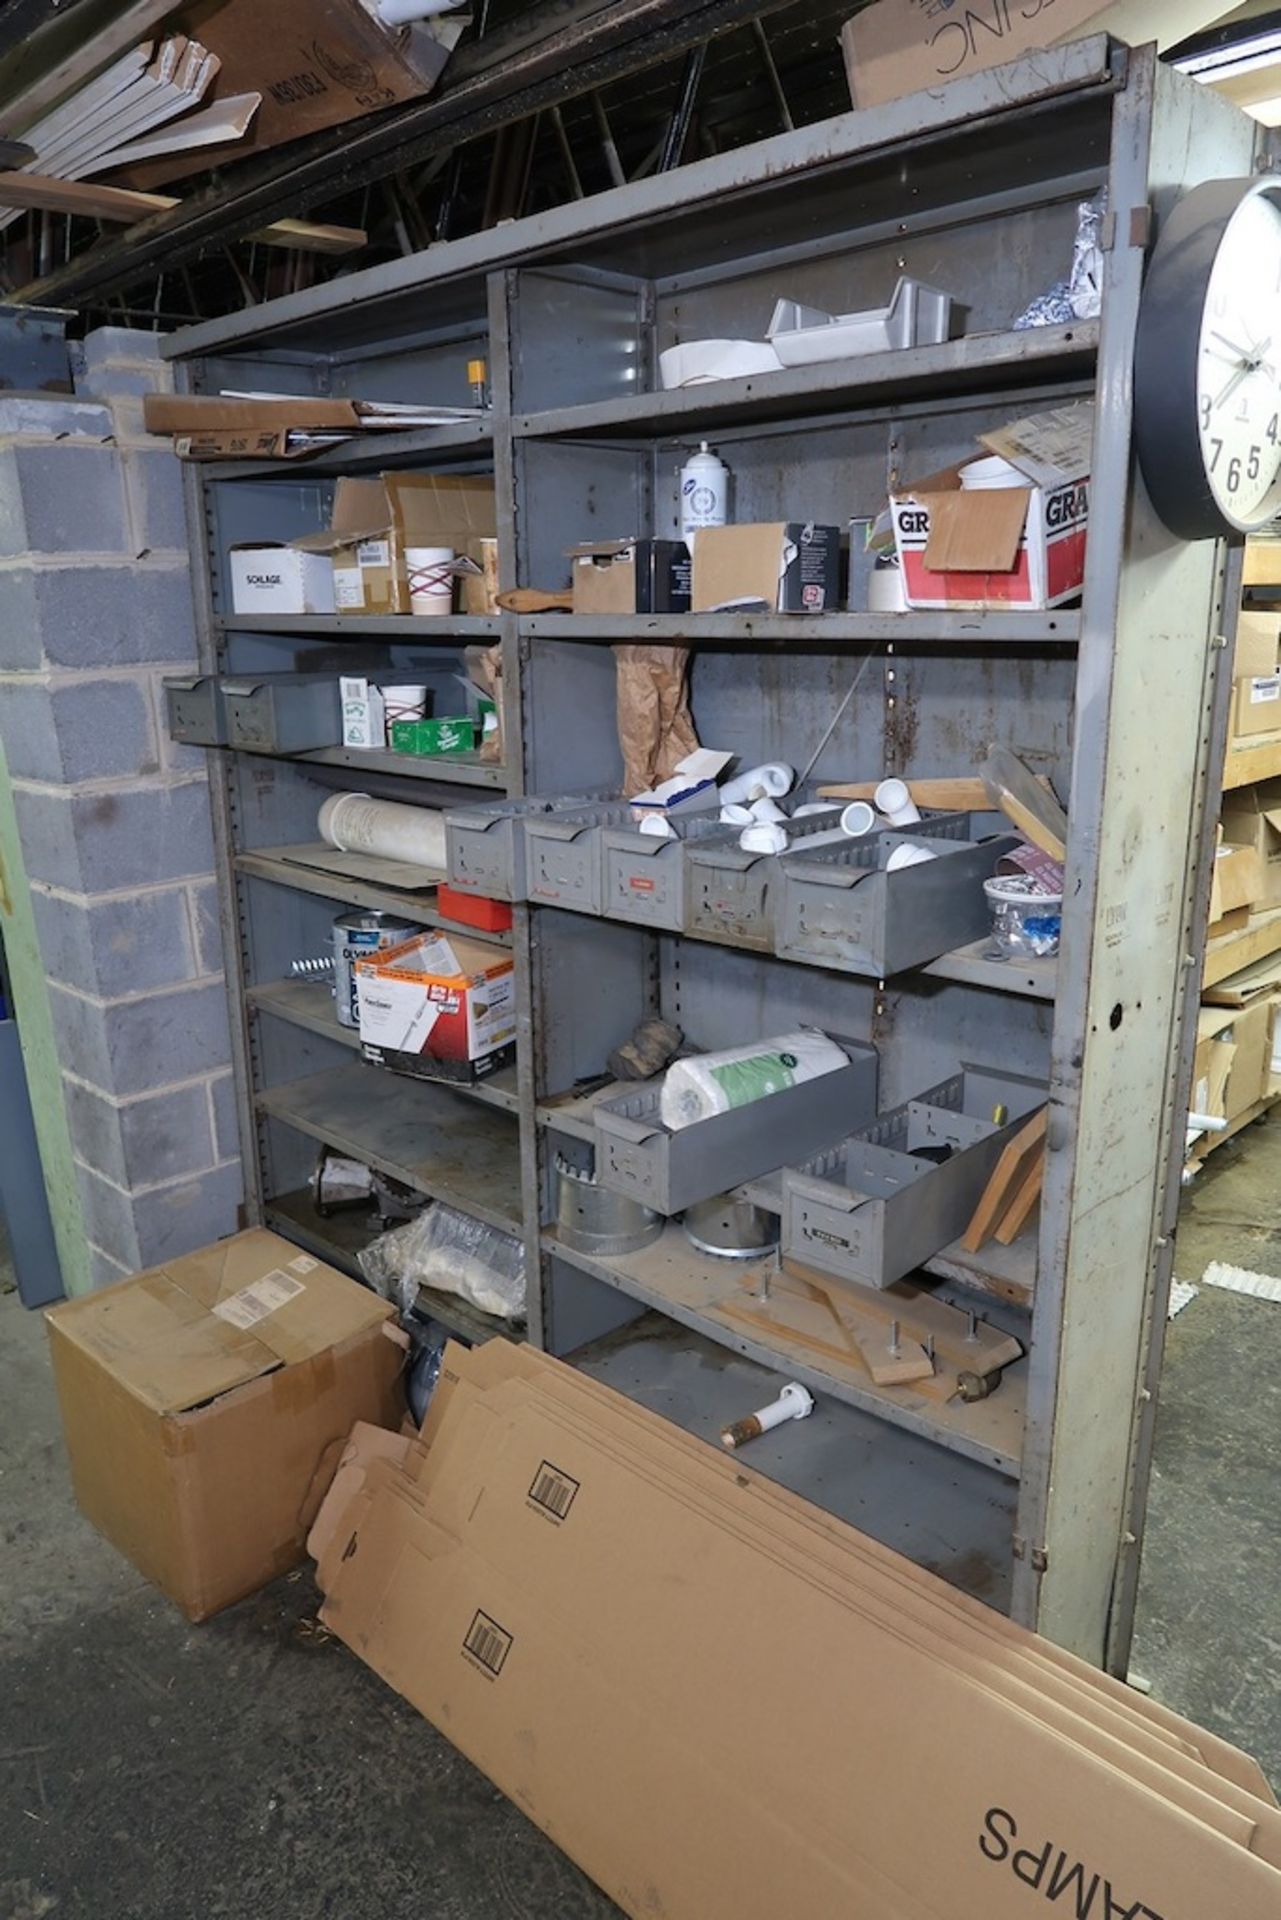 Remaining Contents of Under-Ramp Storage Room, Including Conveyor Parts and Rollers, Etc. - Image 14 of 21